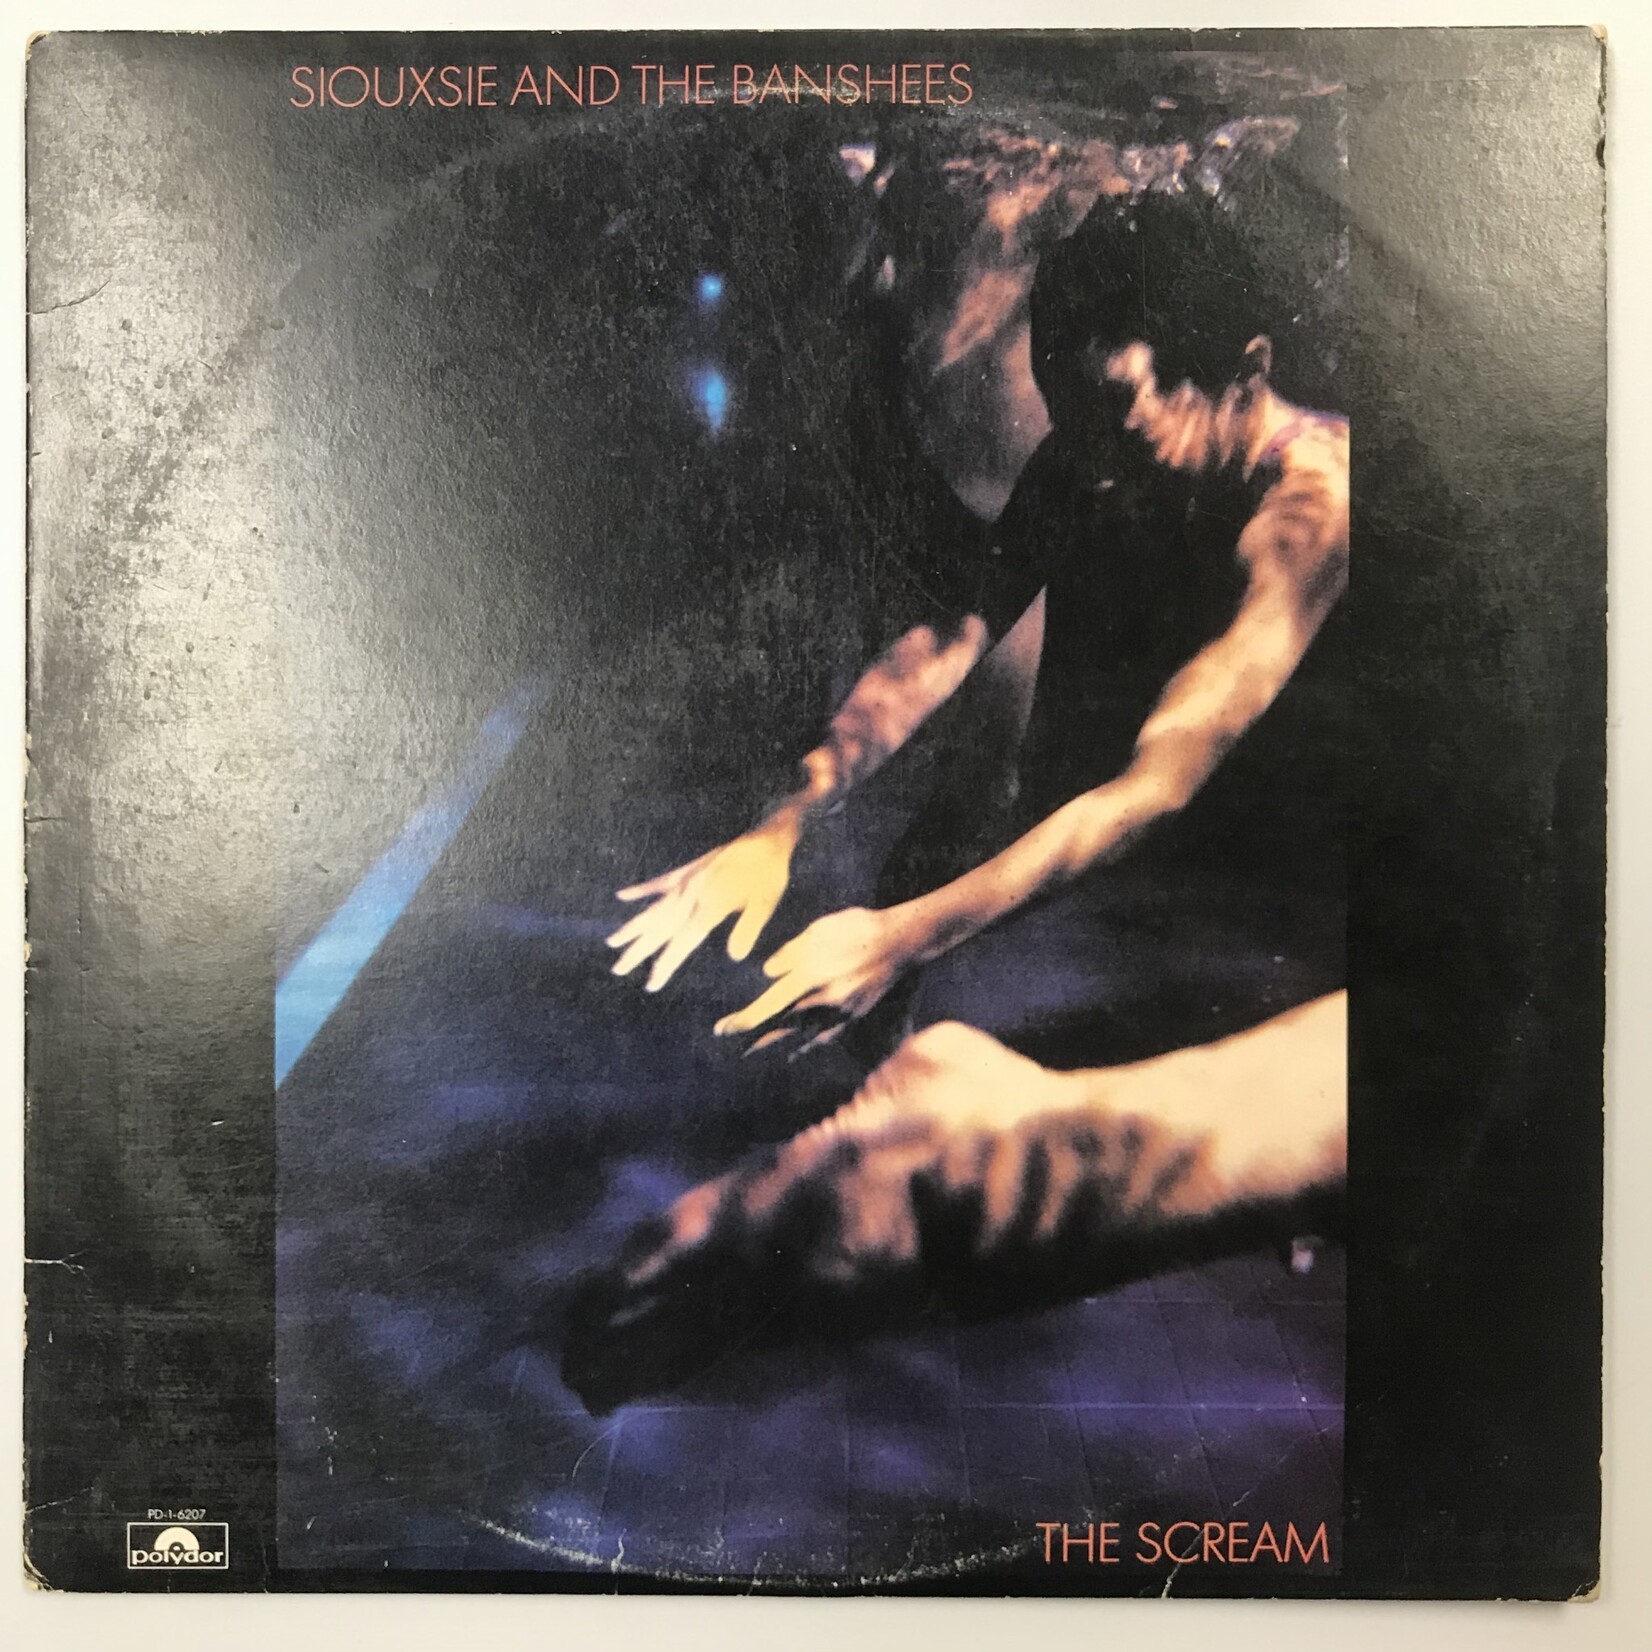 Siouxsie And The Banshees - The Scream - PD-1-6207 - Vinyl LP (USED - PROMO)